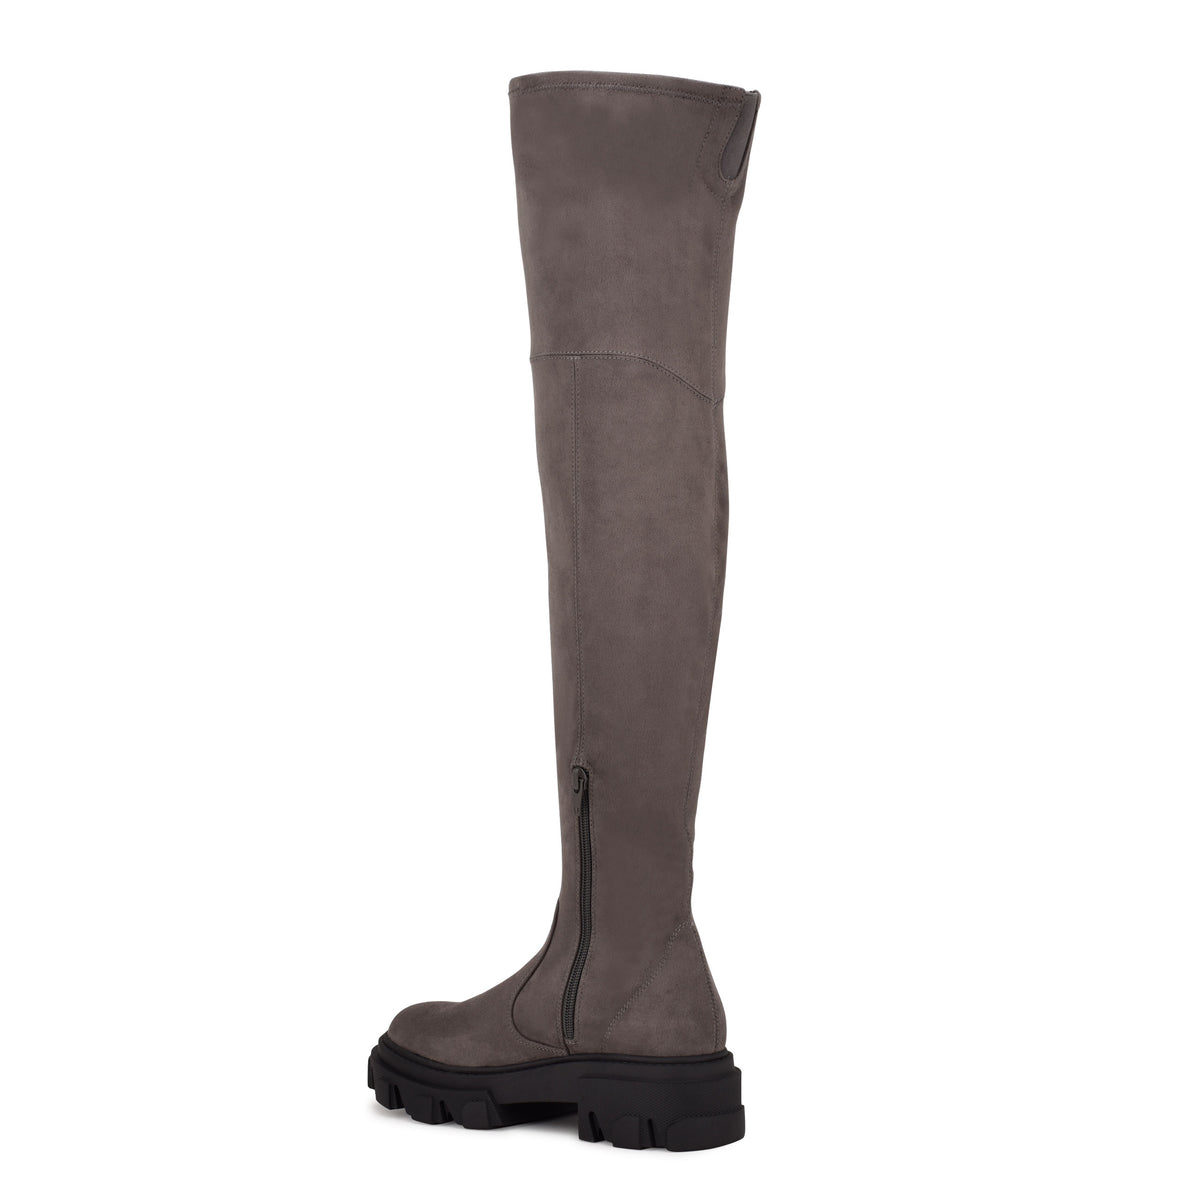 Cellie Over the Knee Lug Sole Boots